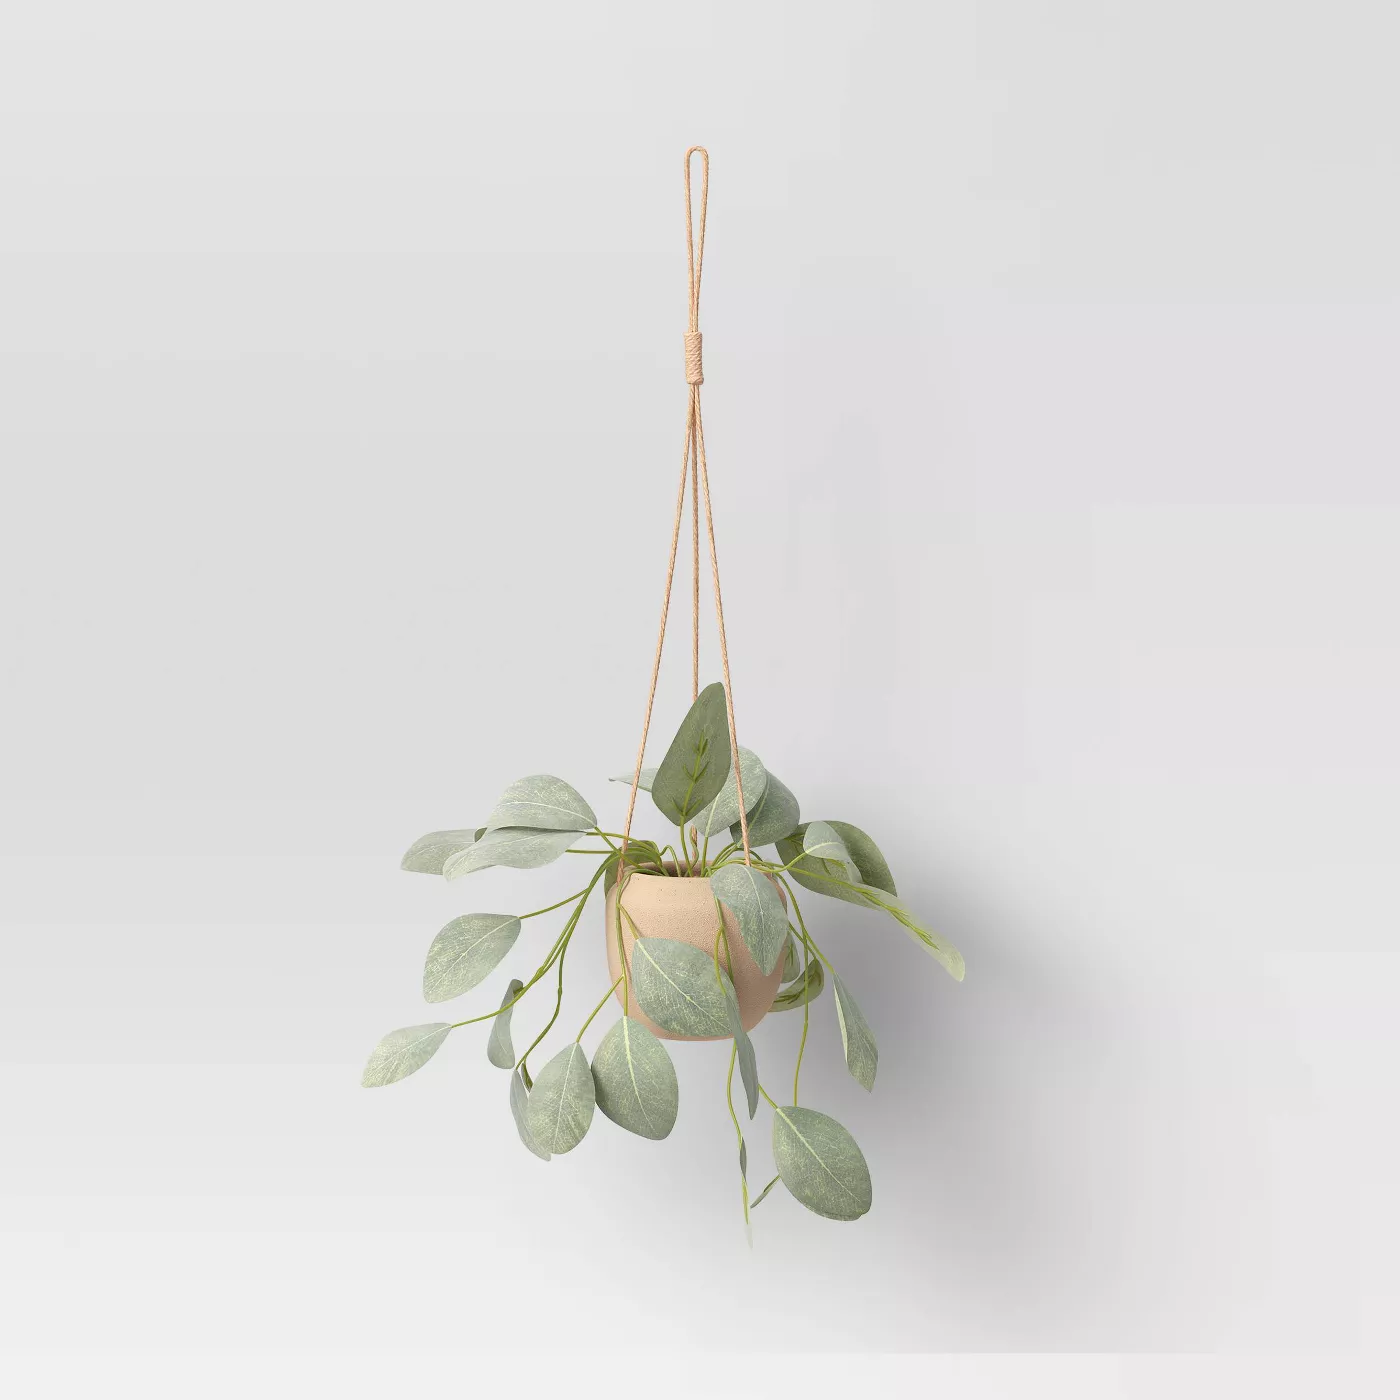 Greenery with Rustic Ceramic Pot Decorative Wall Sculptures Green - Threshold™ - image 1 of 5